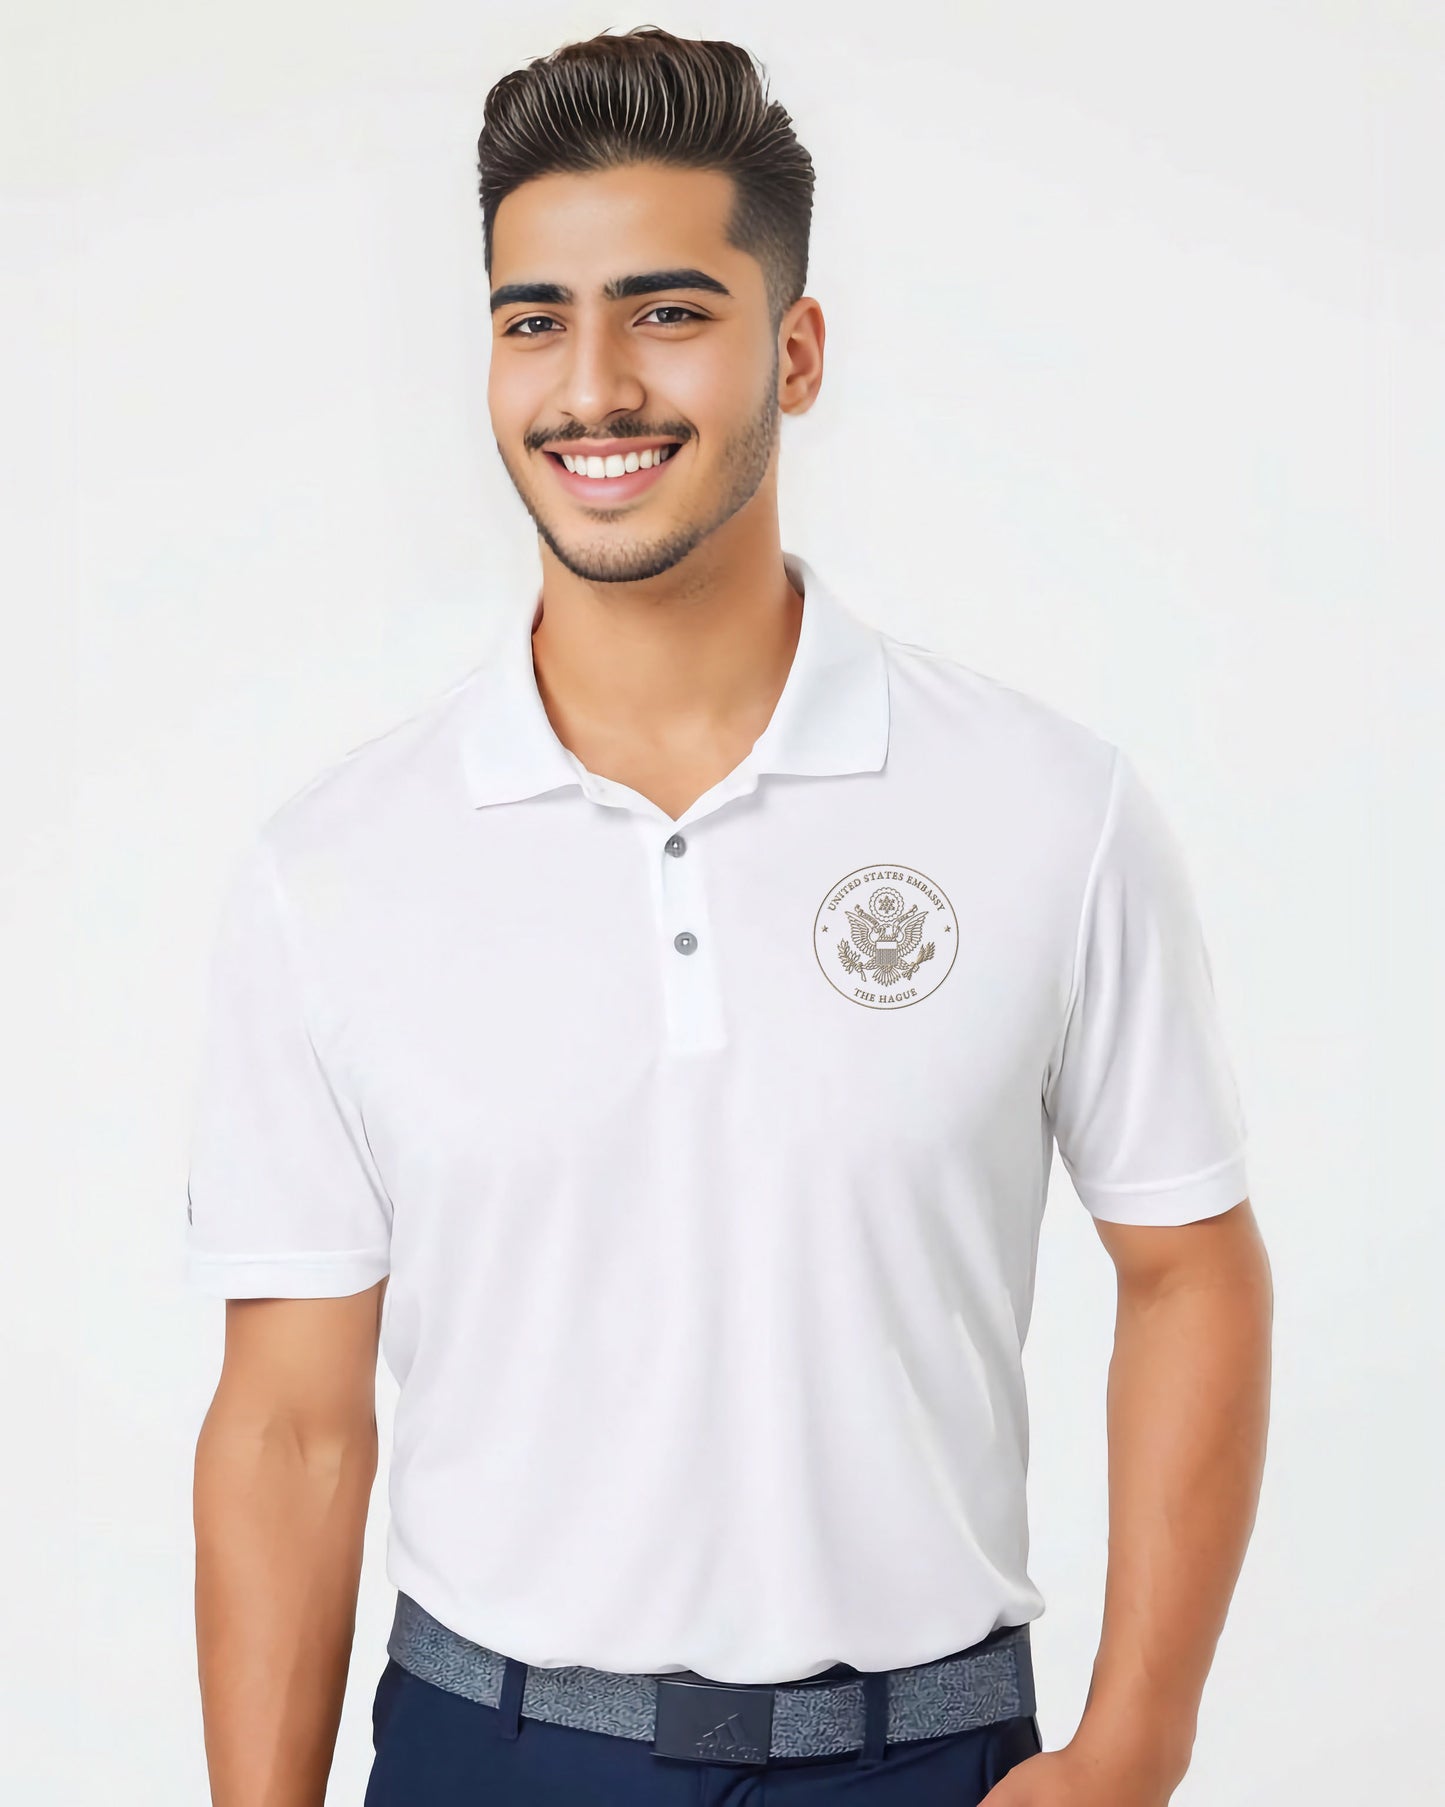 Adidas® Embroidered Polo, Gold Seal: The Hague